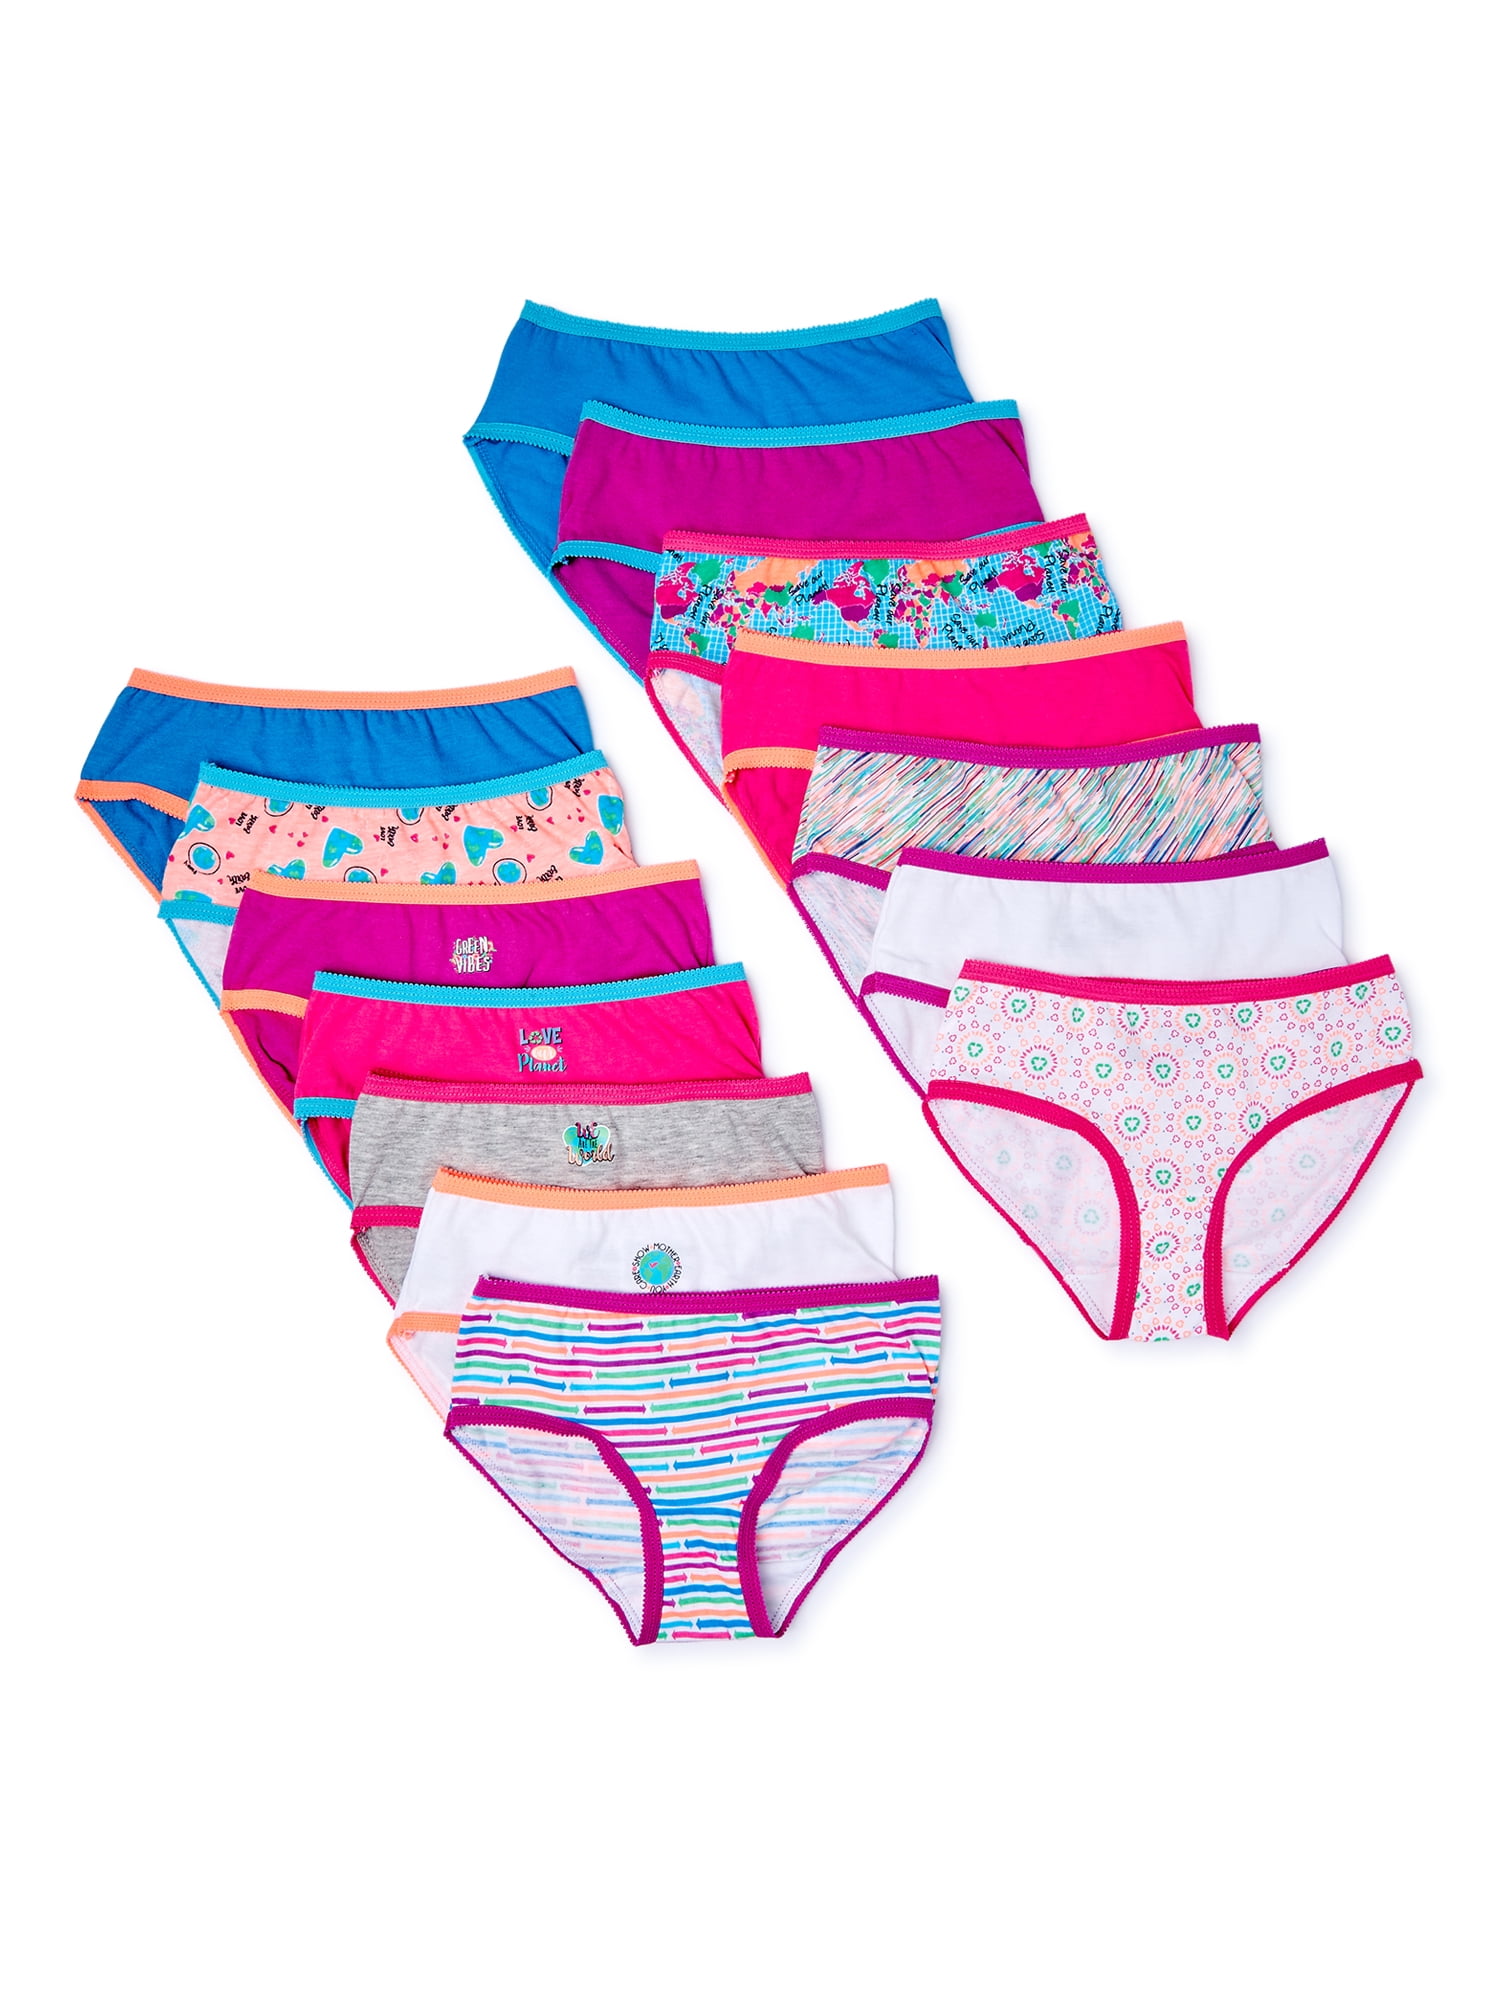 New in Package ~ 6 pair of Girl's Hipster Underwear Panties ~ Size  M or  XL 